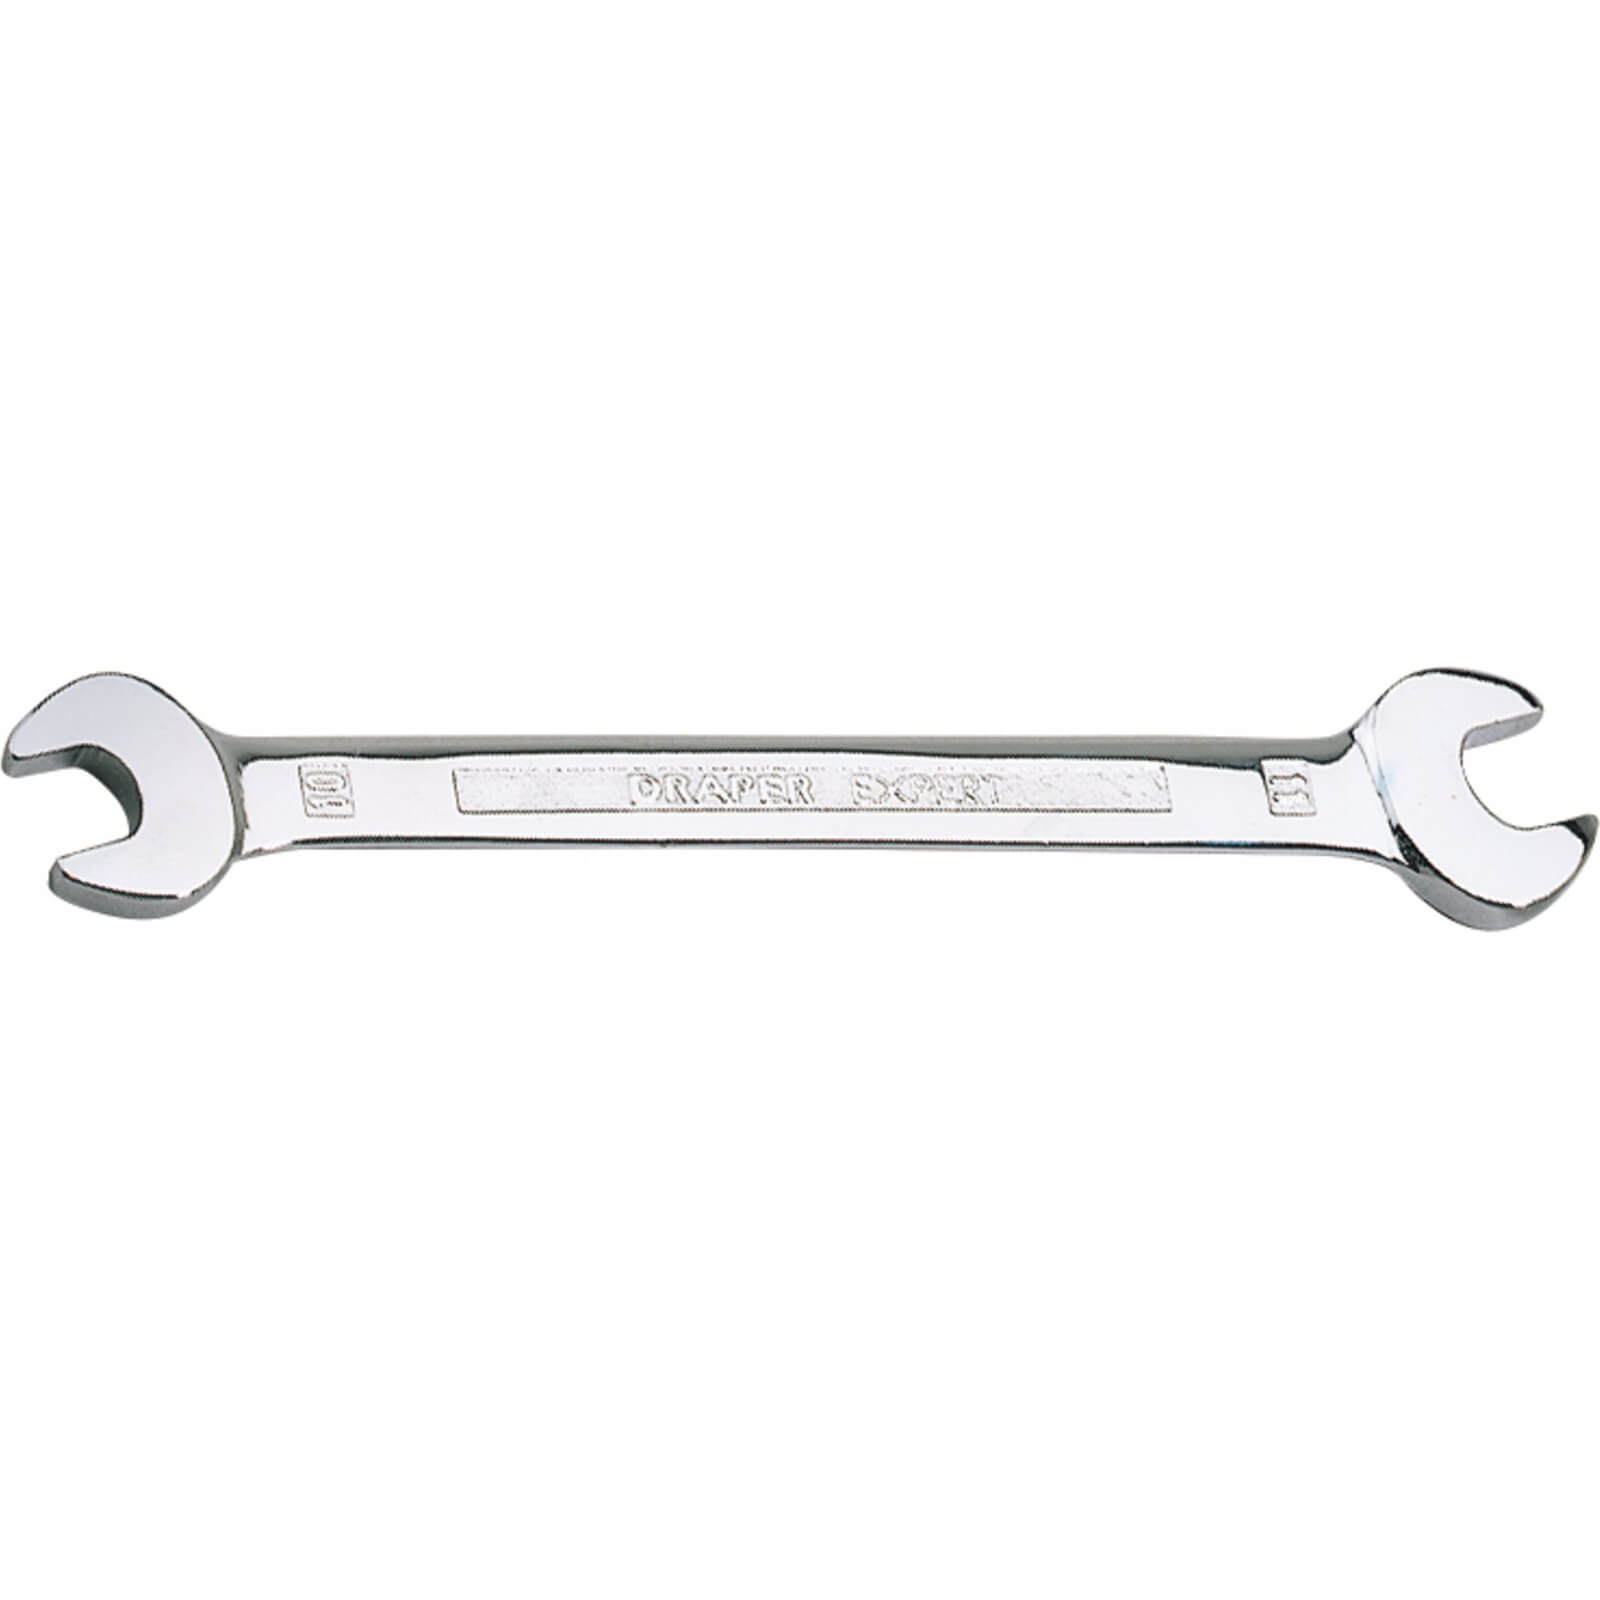 Image of Draper Expert Double Open Ended Spanner Metric 10mm x 11mm